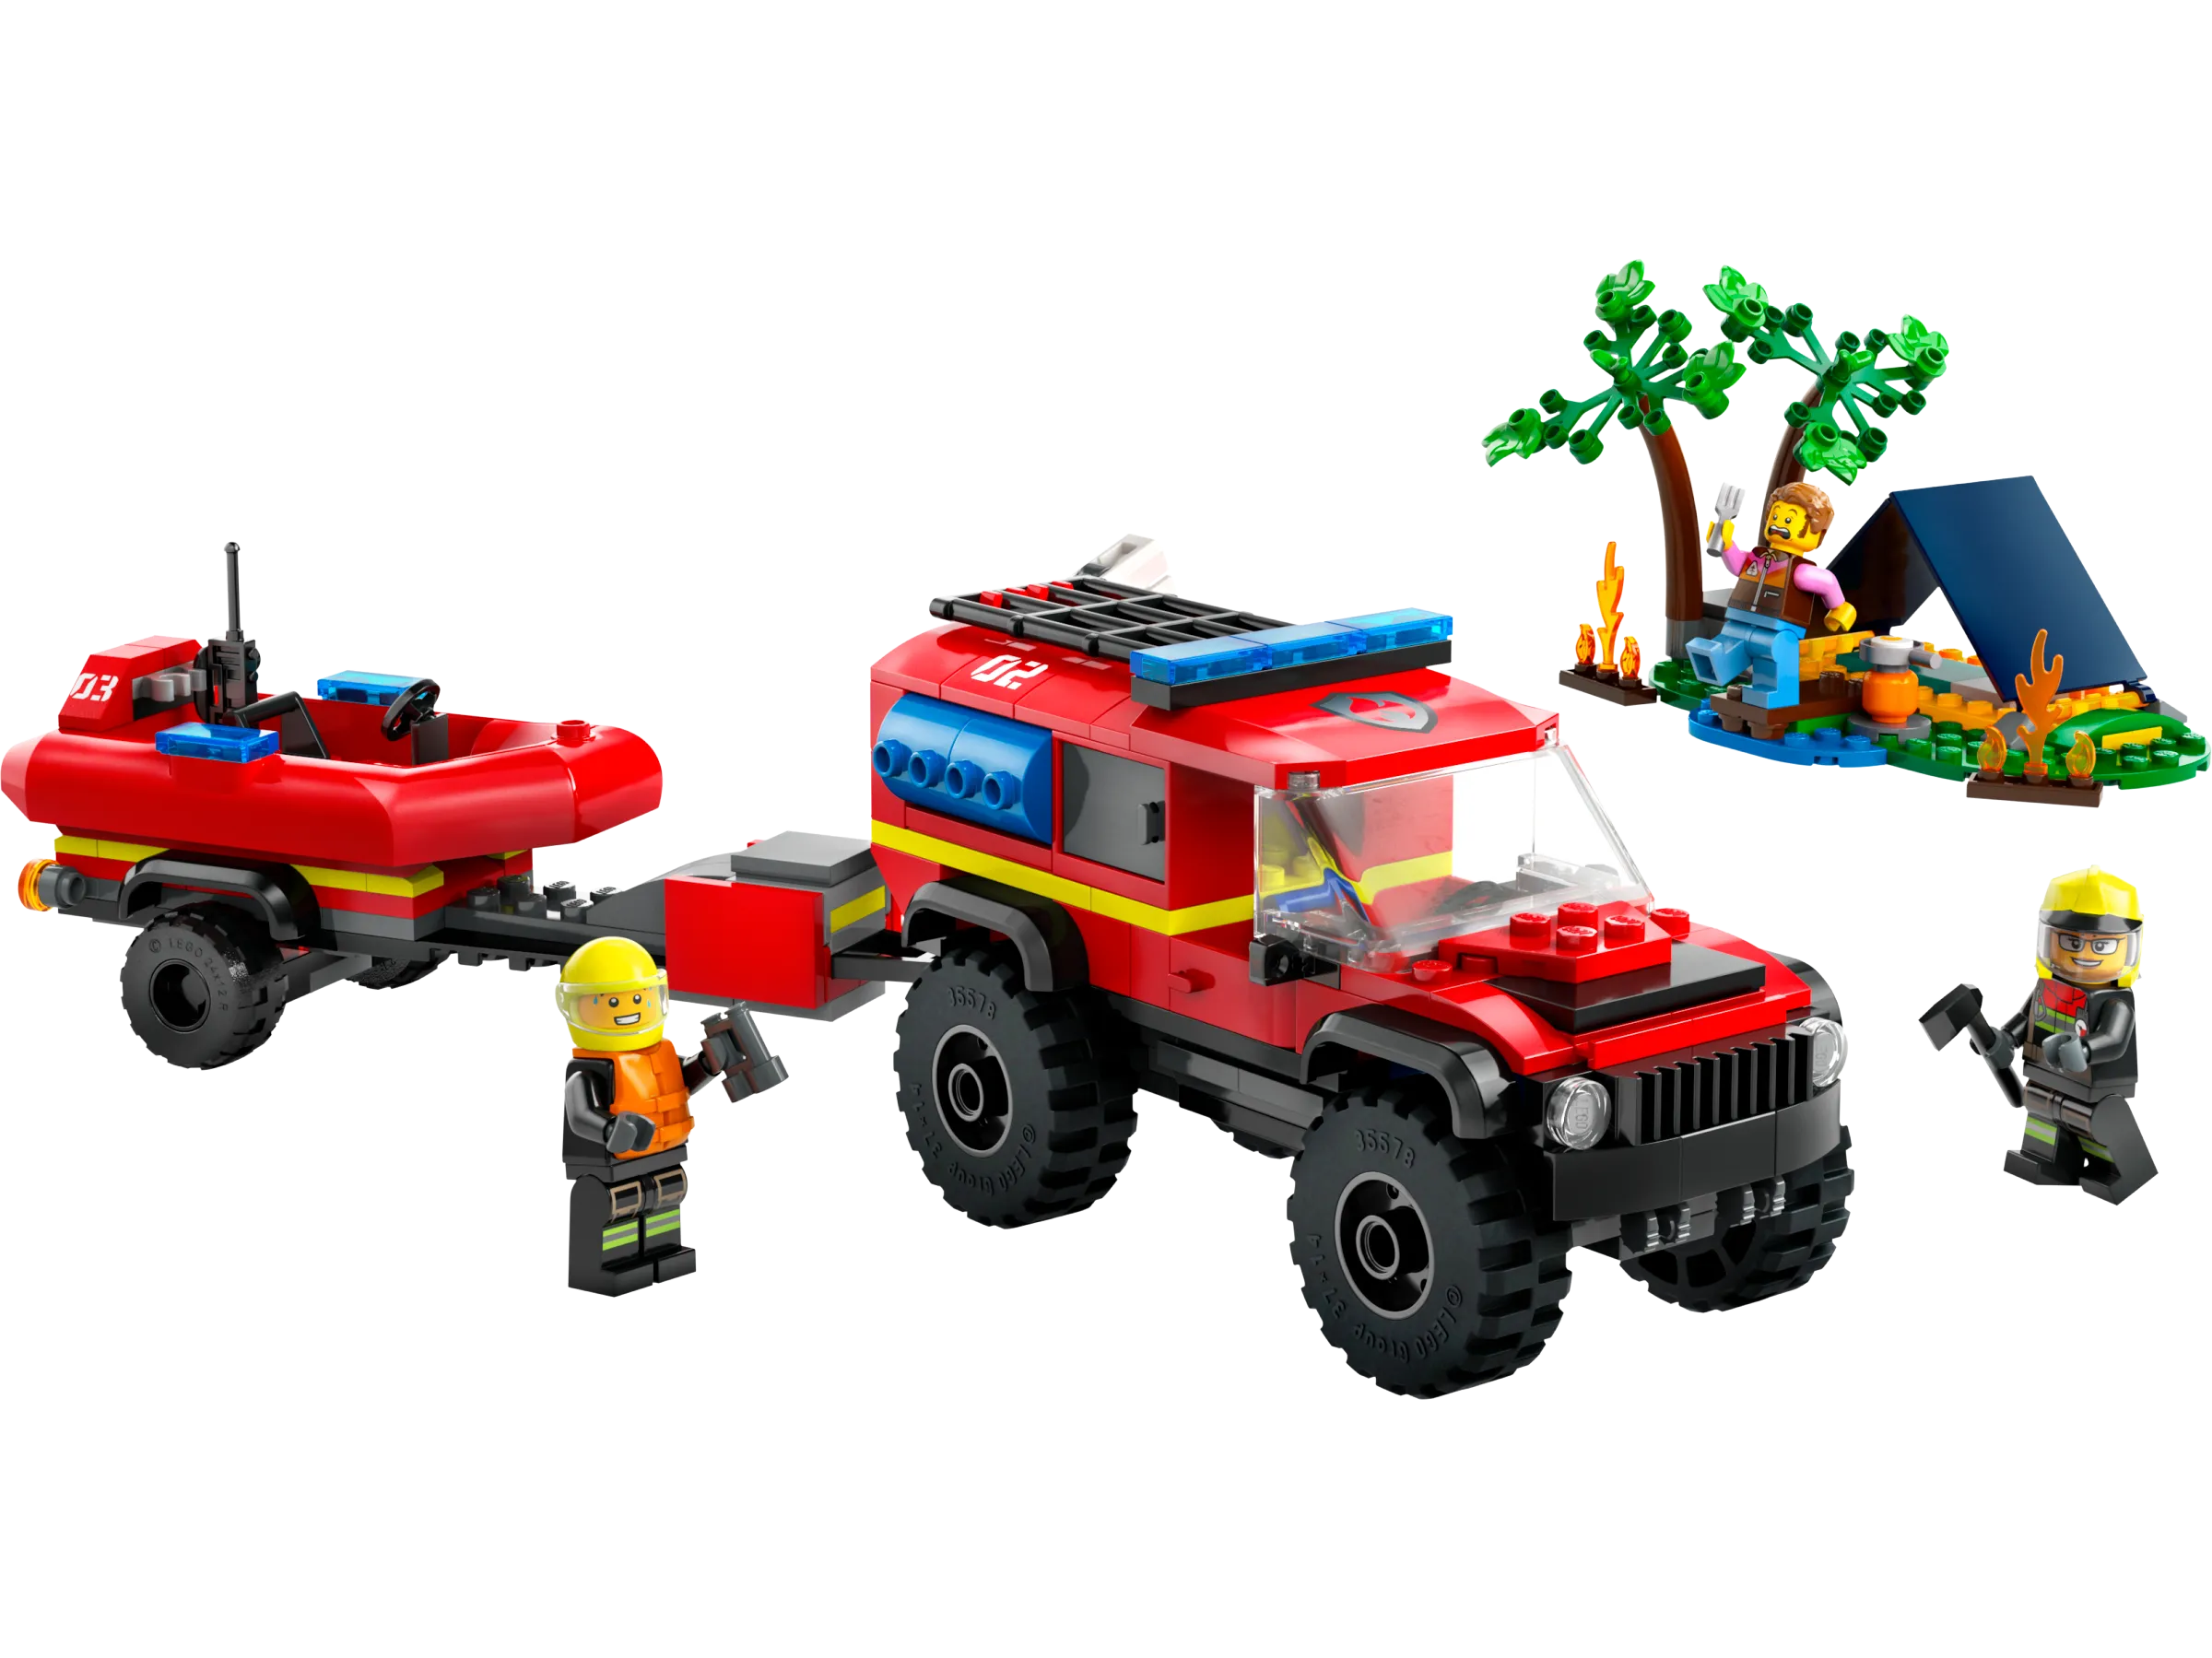 City 4x4 Fire Truck with Rescue Boat Gallery